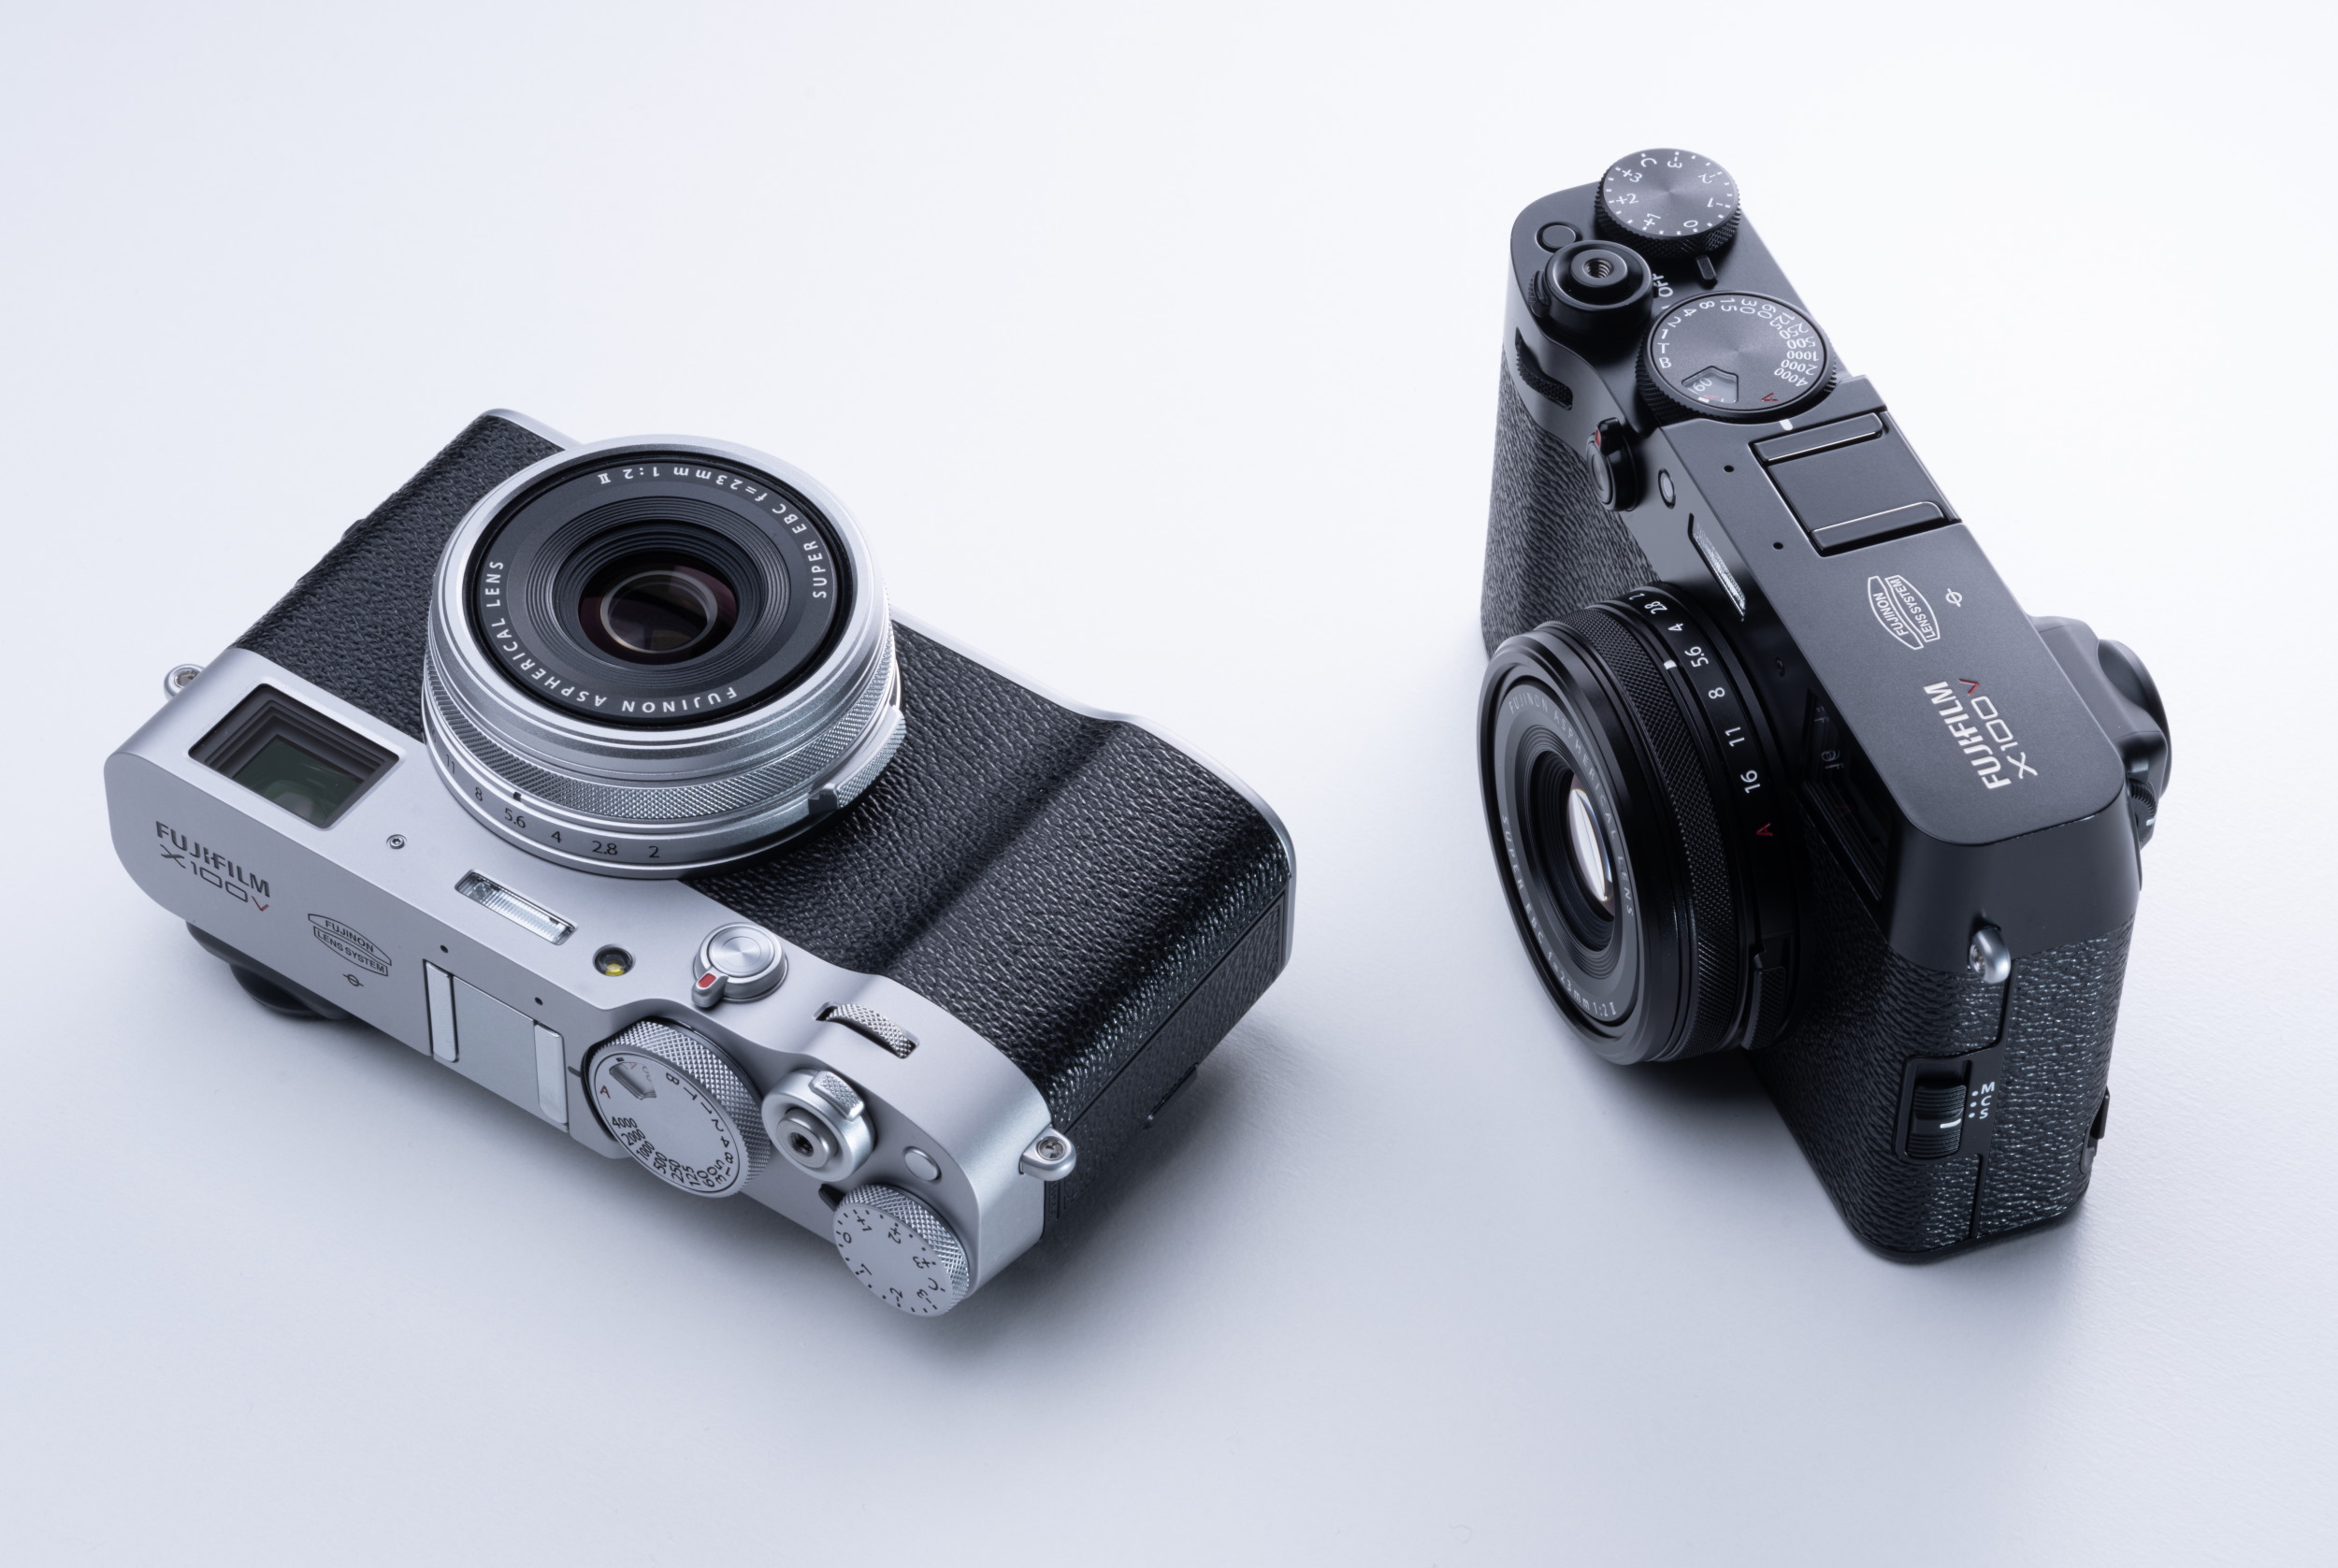 Fujifilm’s X100V strengthens the case for owning a compact camera